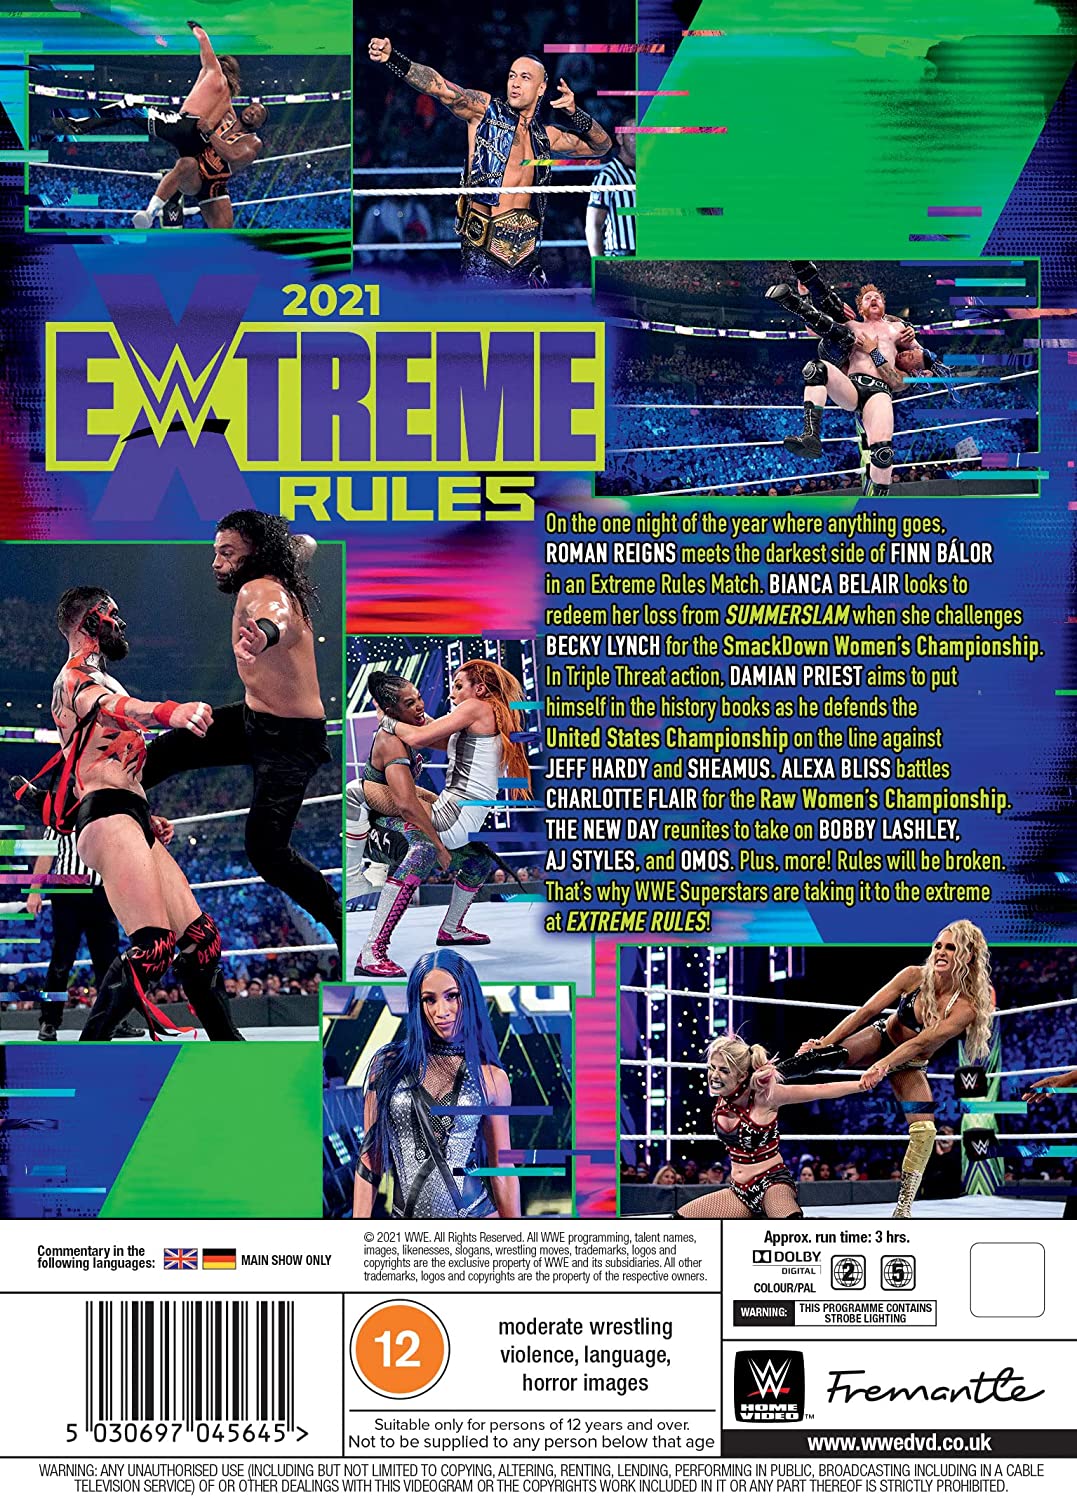 WWE: Extreme Rules 2021 [DVD]